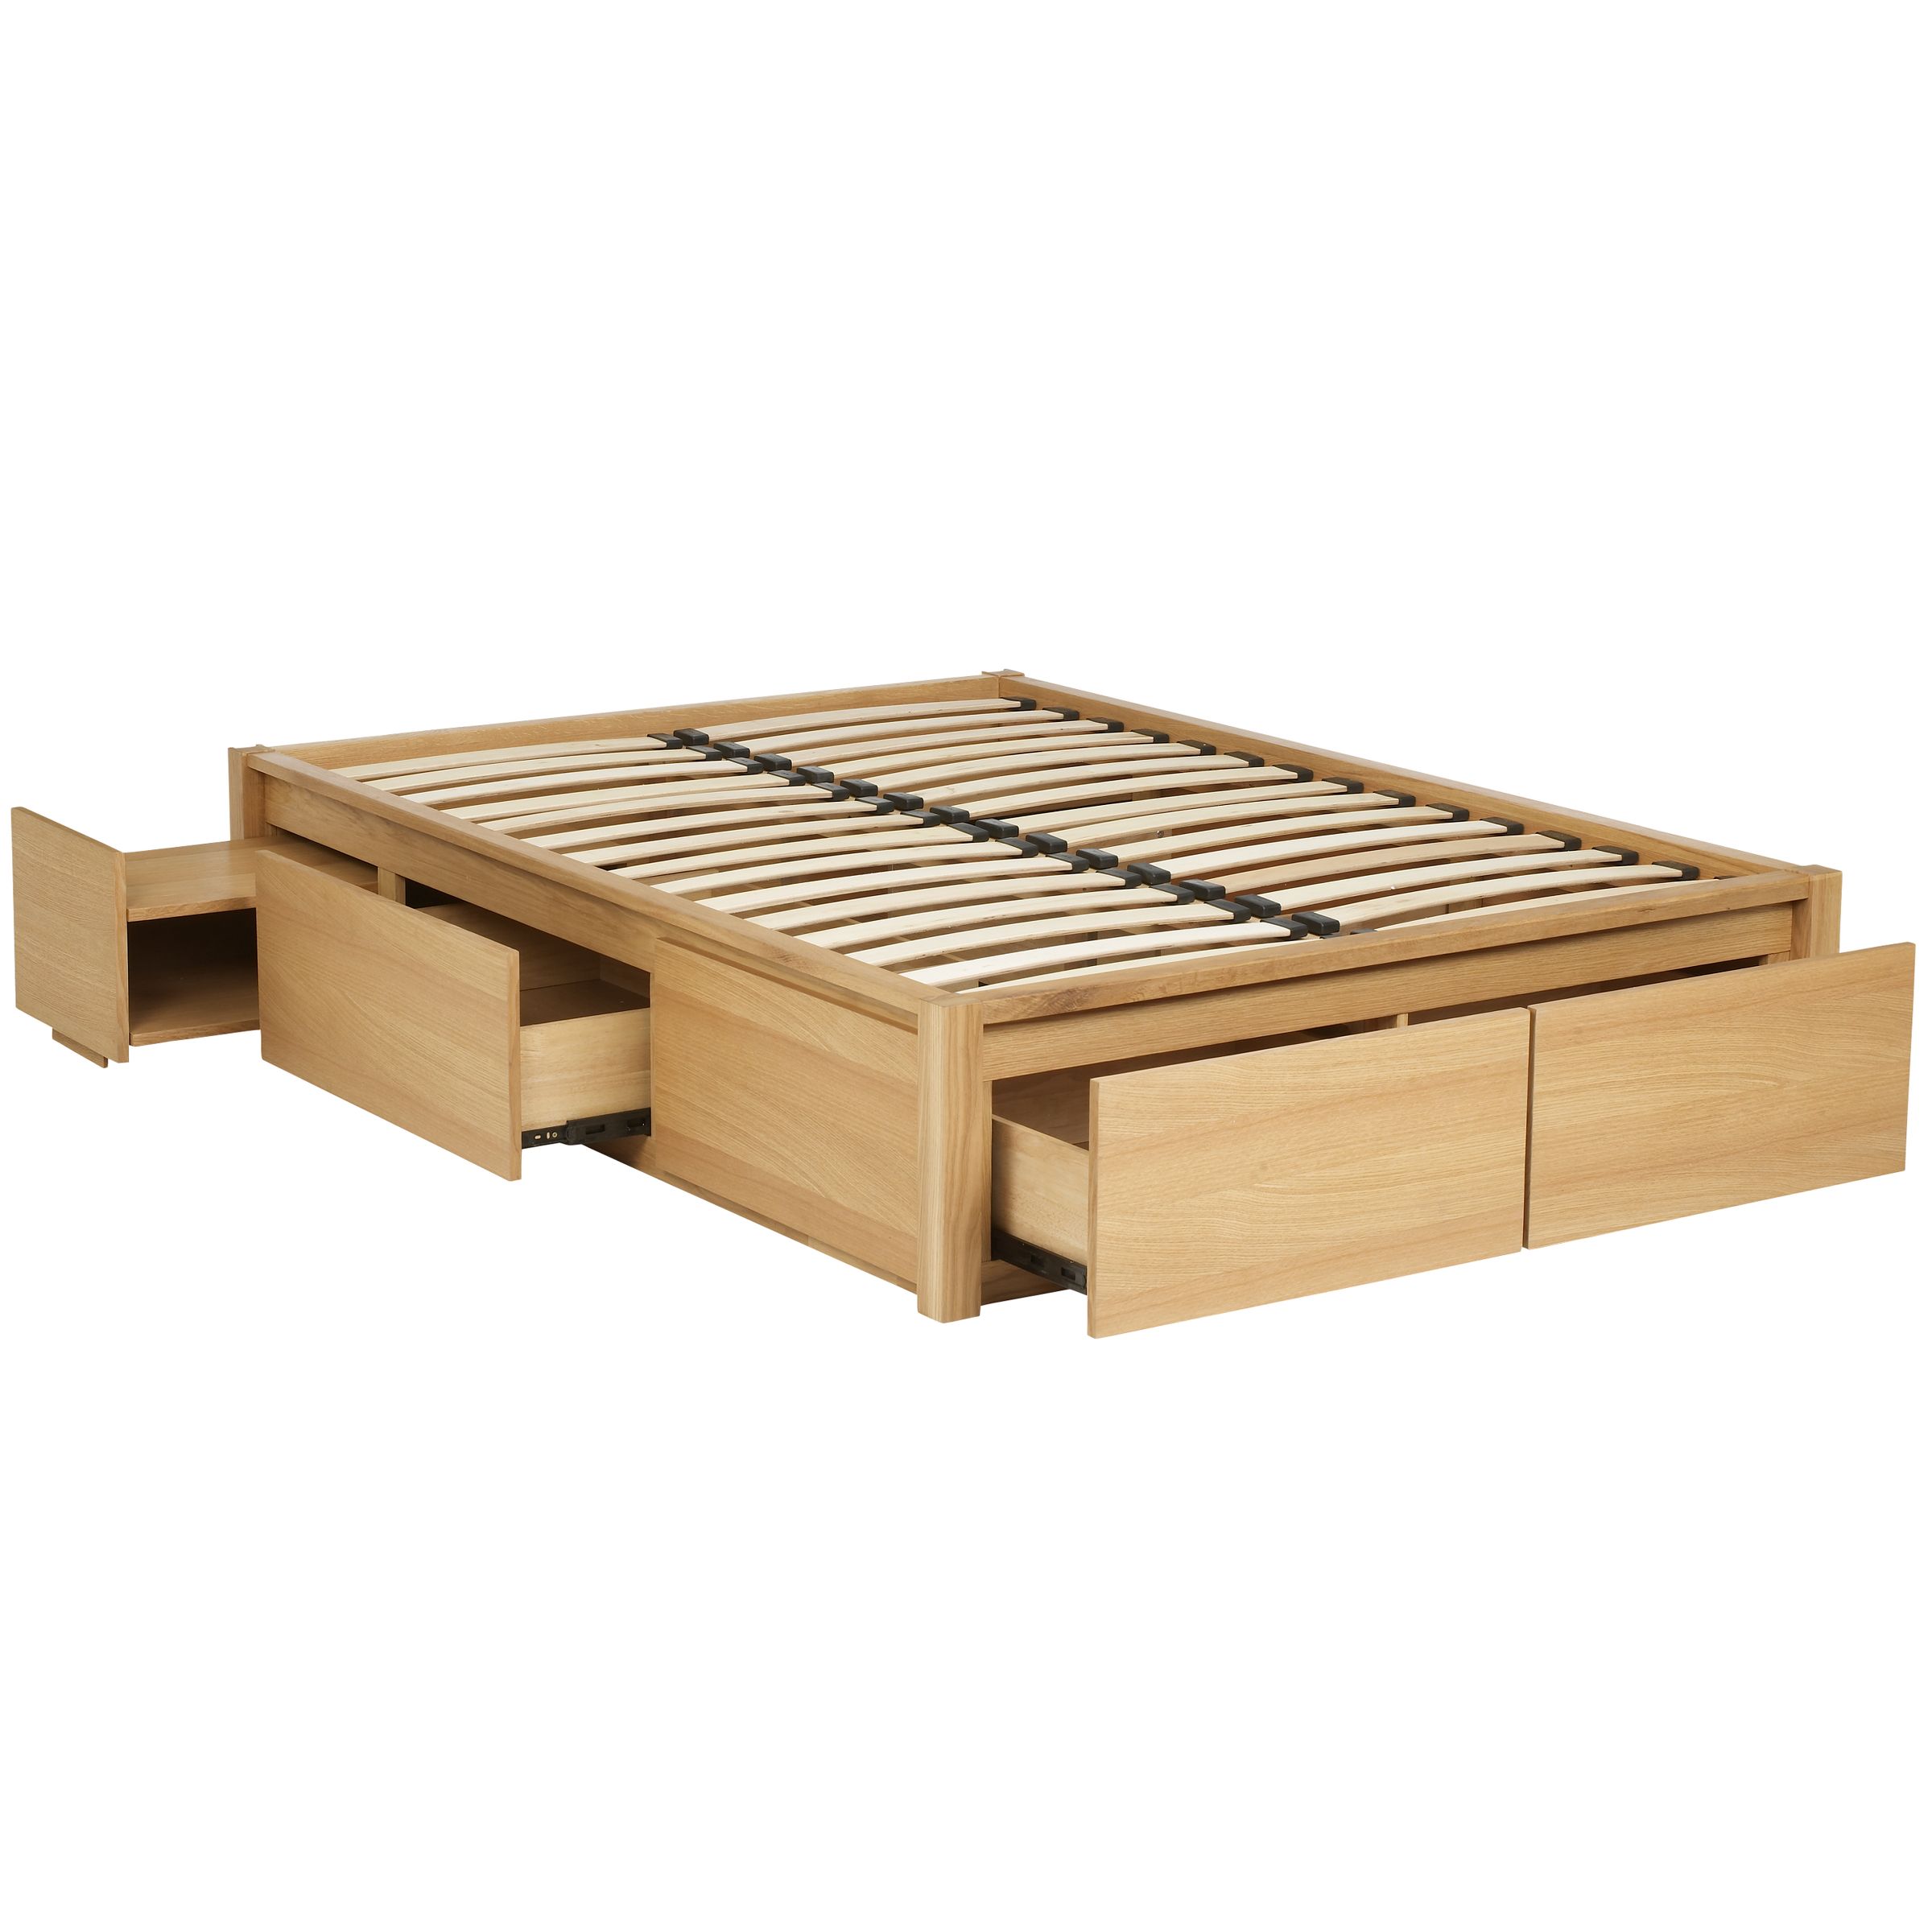 platform bed with storage drawers plans read sources bed wikipedia ...